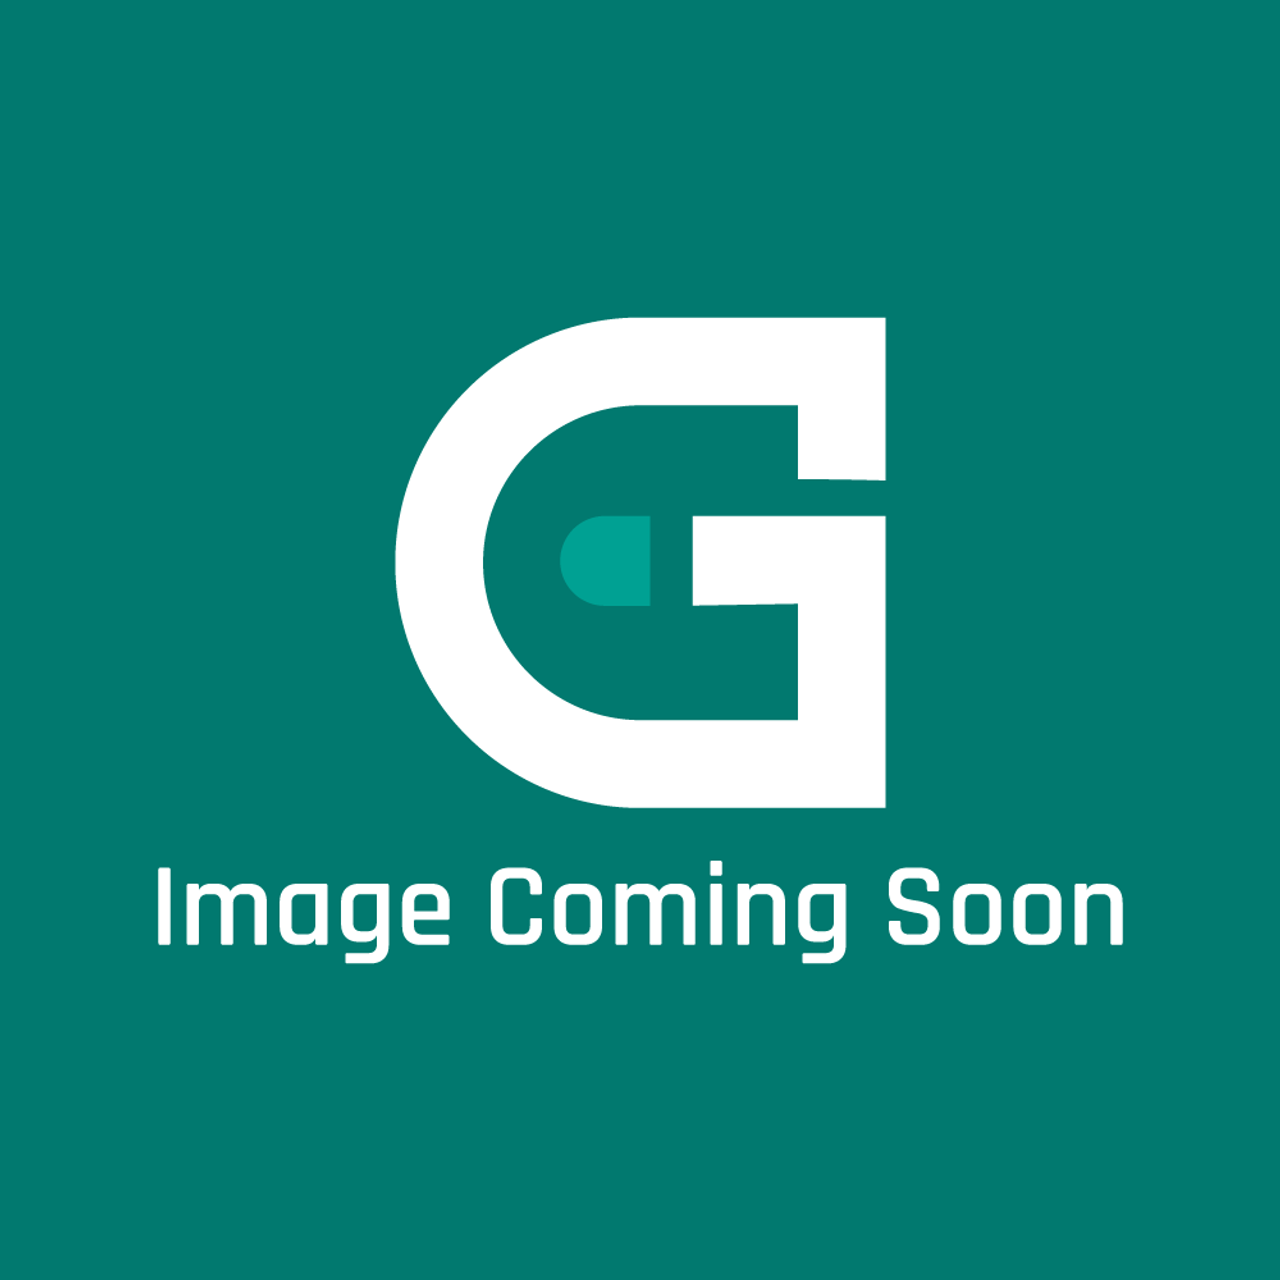 Frigidaire - Electrolux 316576694 Controller - Image Coming Soon!